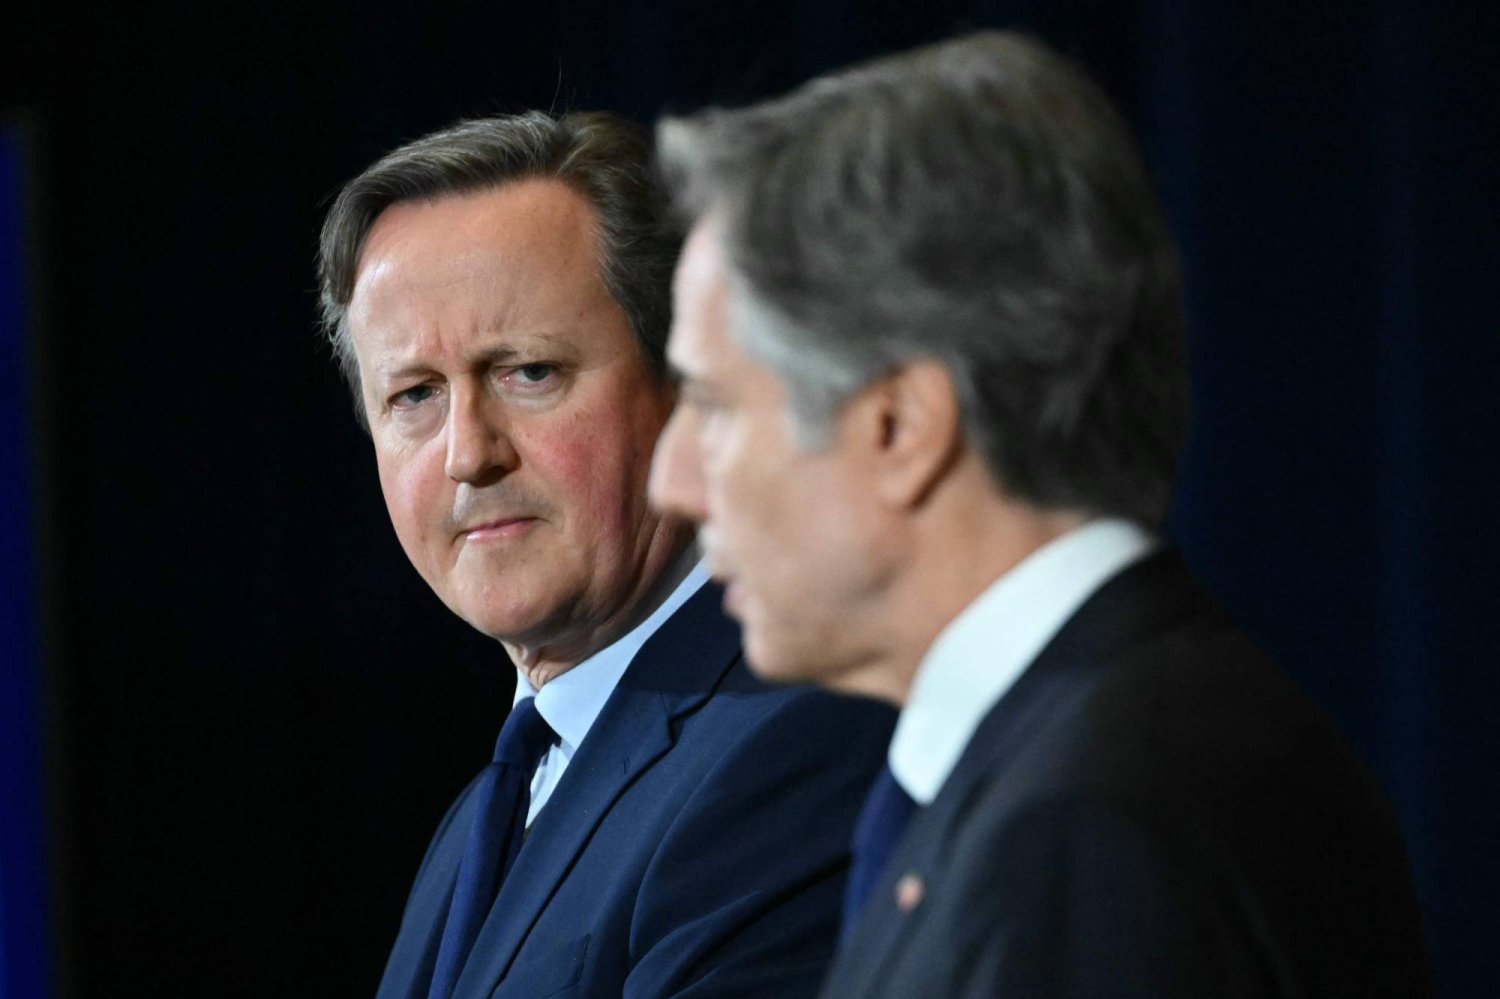 Cameron's visit to the U.S. prioritizes discussions on Ukraine aid (Credits: AFP)